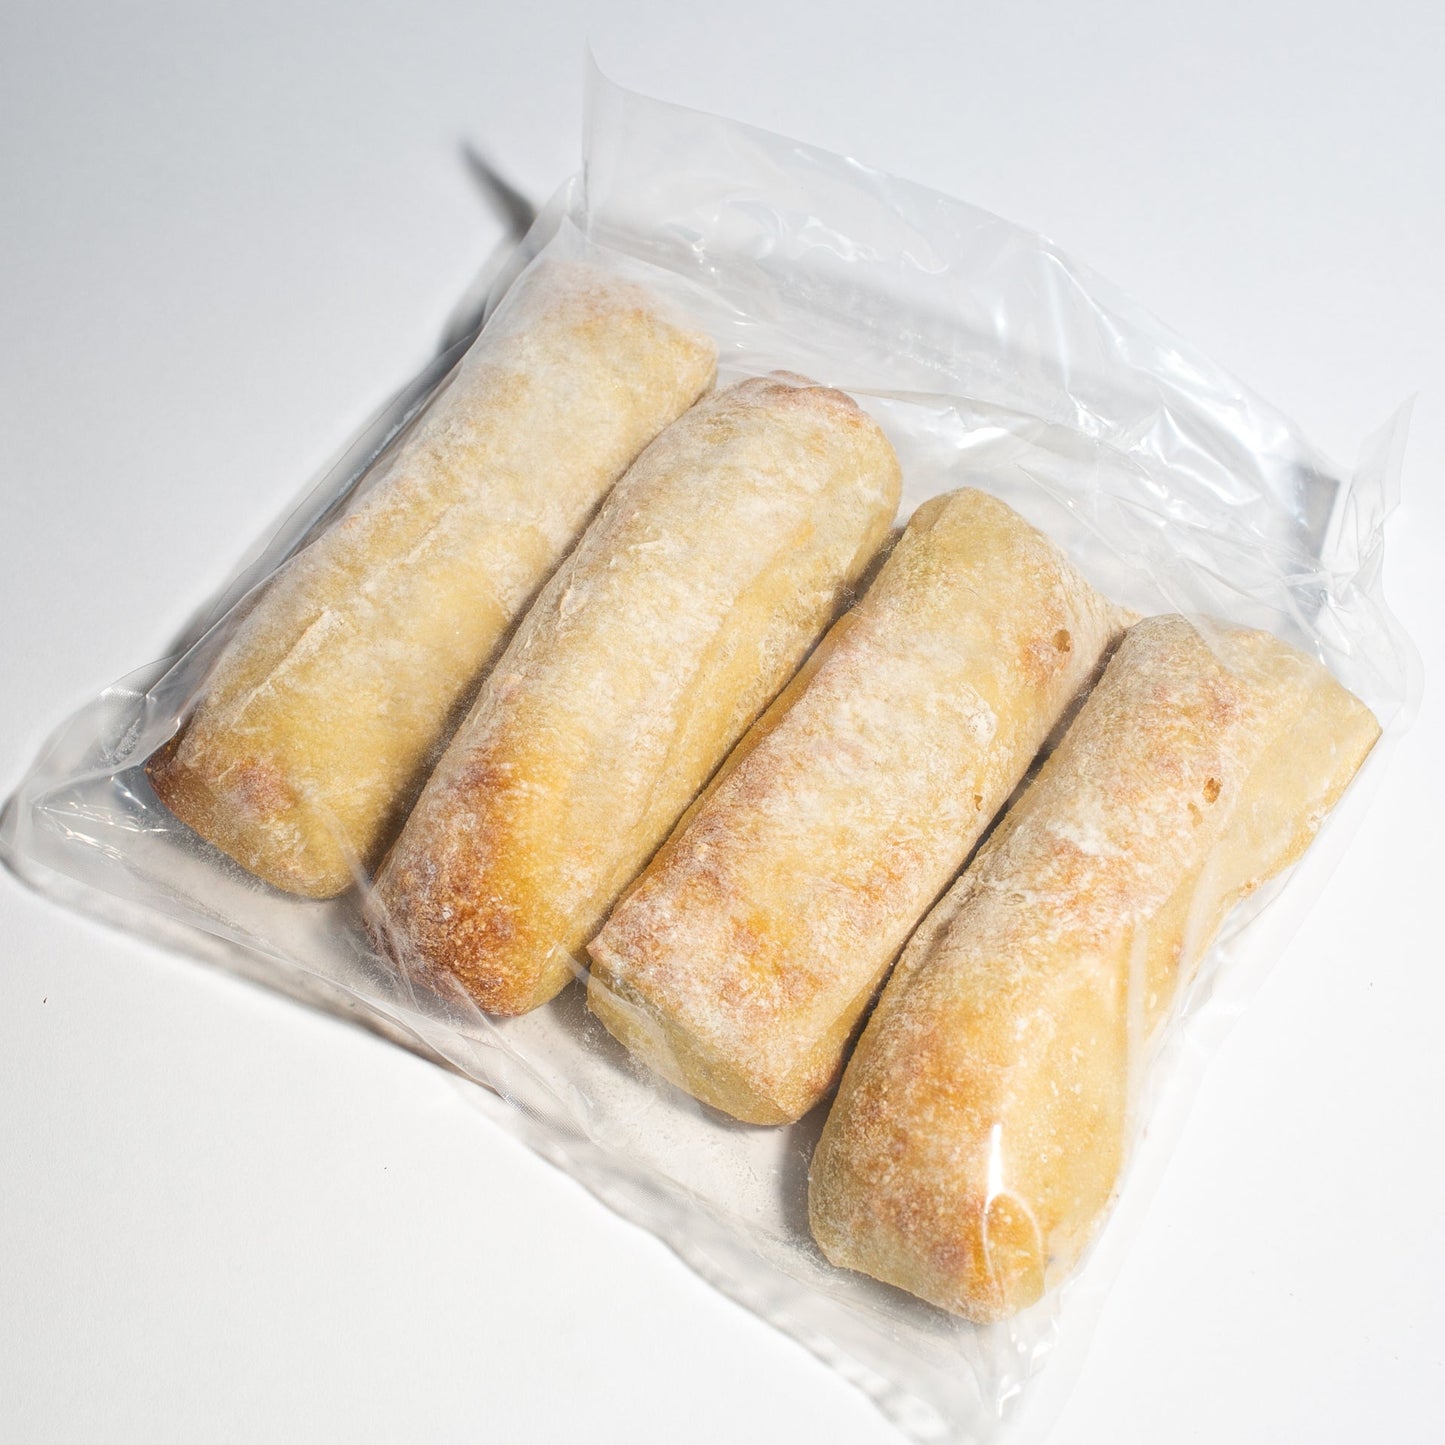 Demi baguettes to finish baking at home any time you need it! Enjoy the smell and the convenience of this easy product. Yann Haute Patisserie, pastry shop and bakery in Calgary.